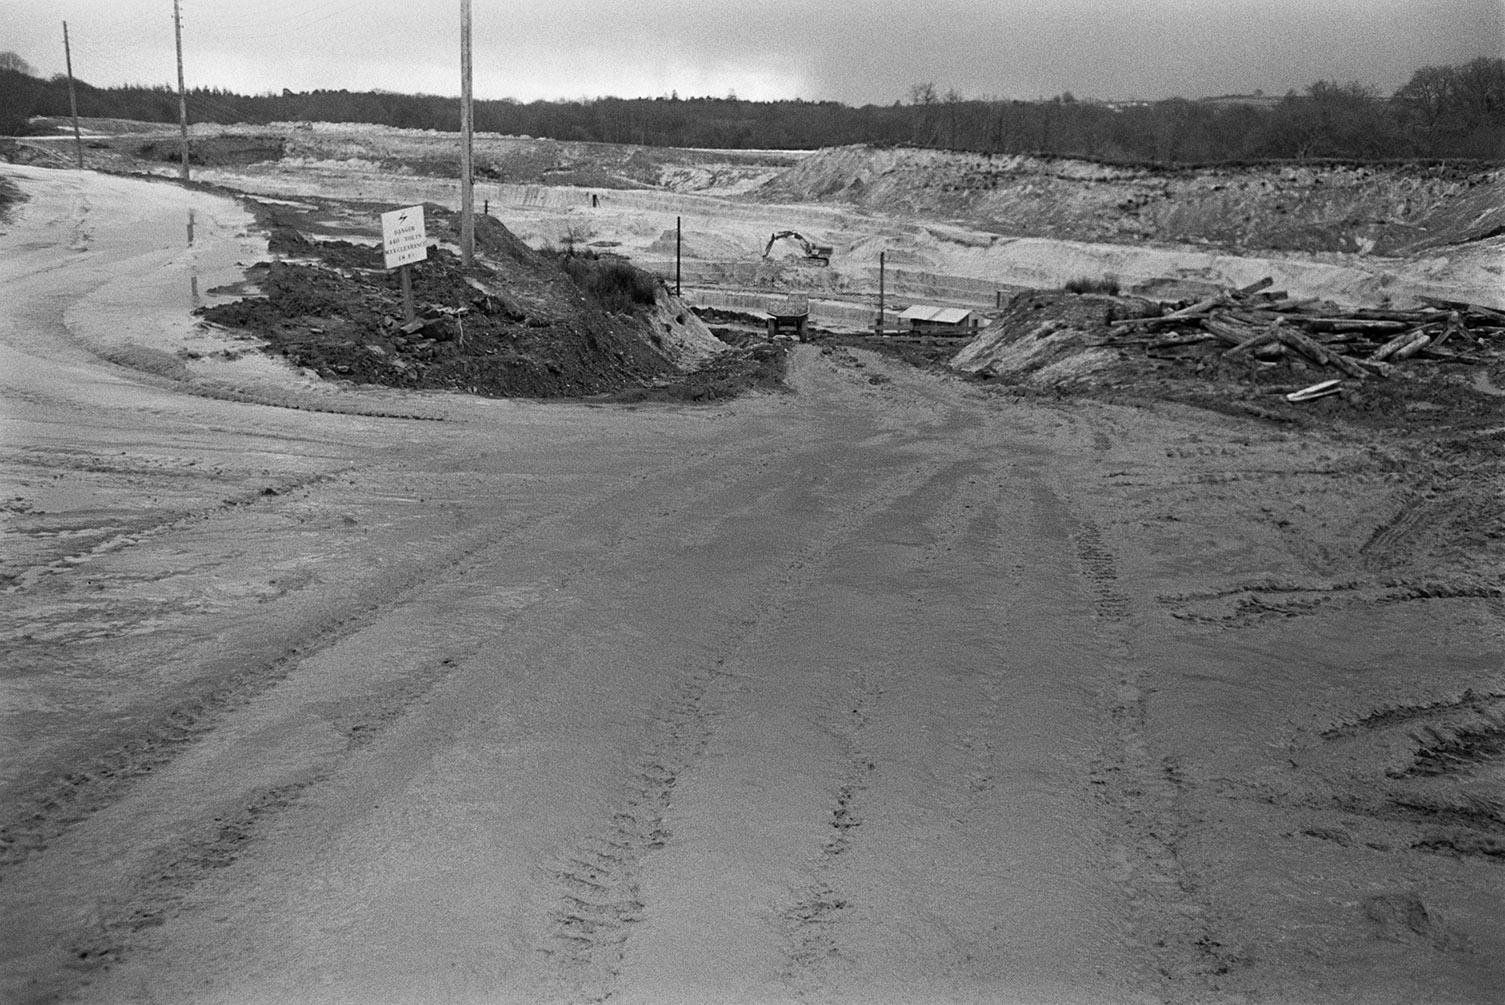 Clay works with a digger excavating in the background at North Devon Clay Pit, Meeth. A road down to the quarry and timber is visible in the foreground.